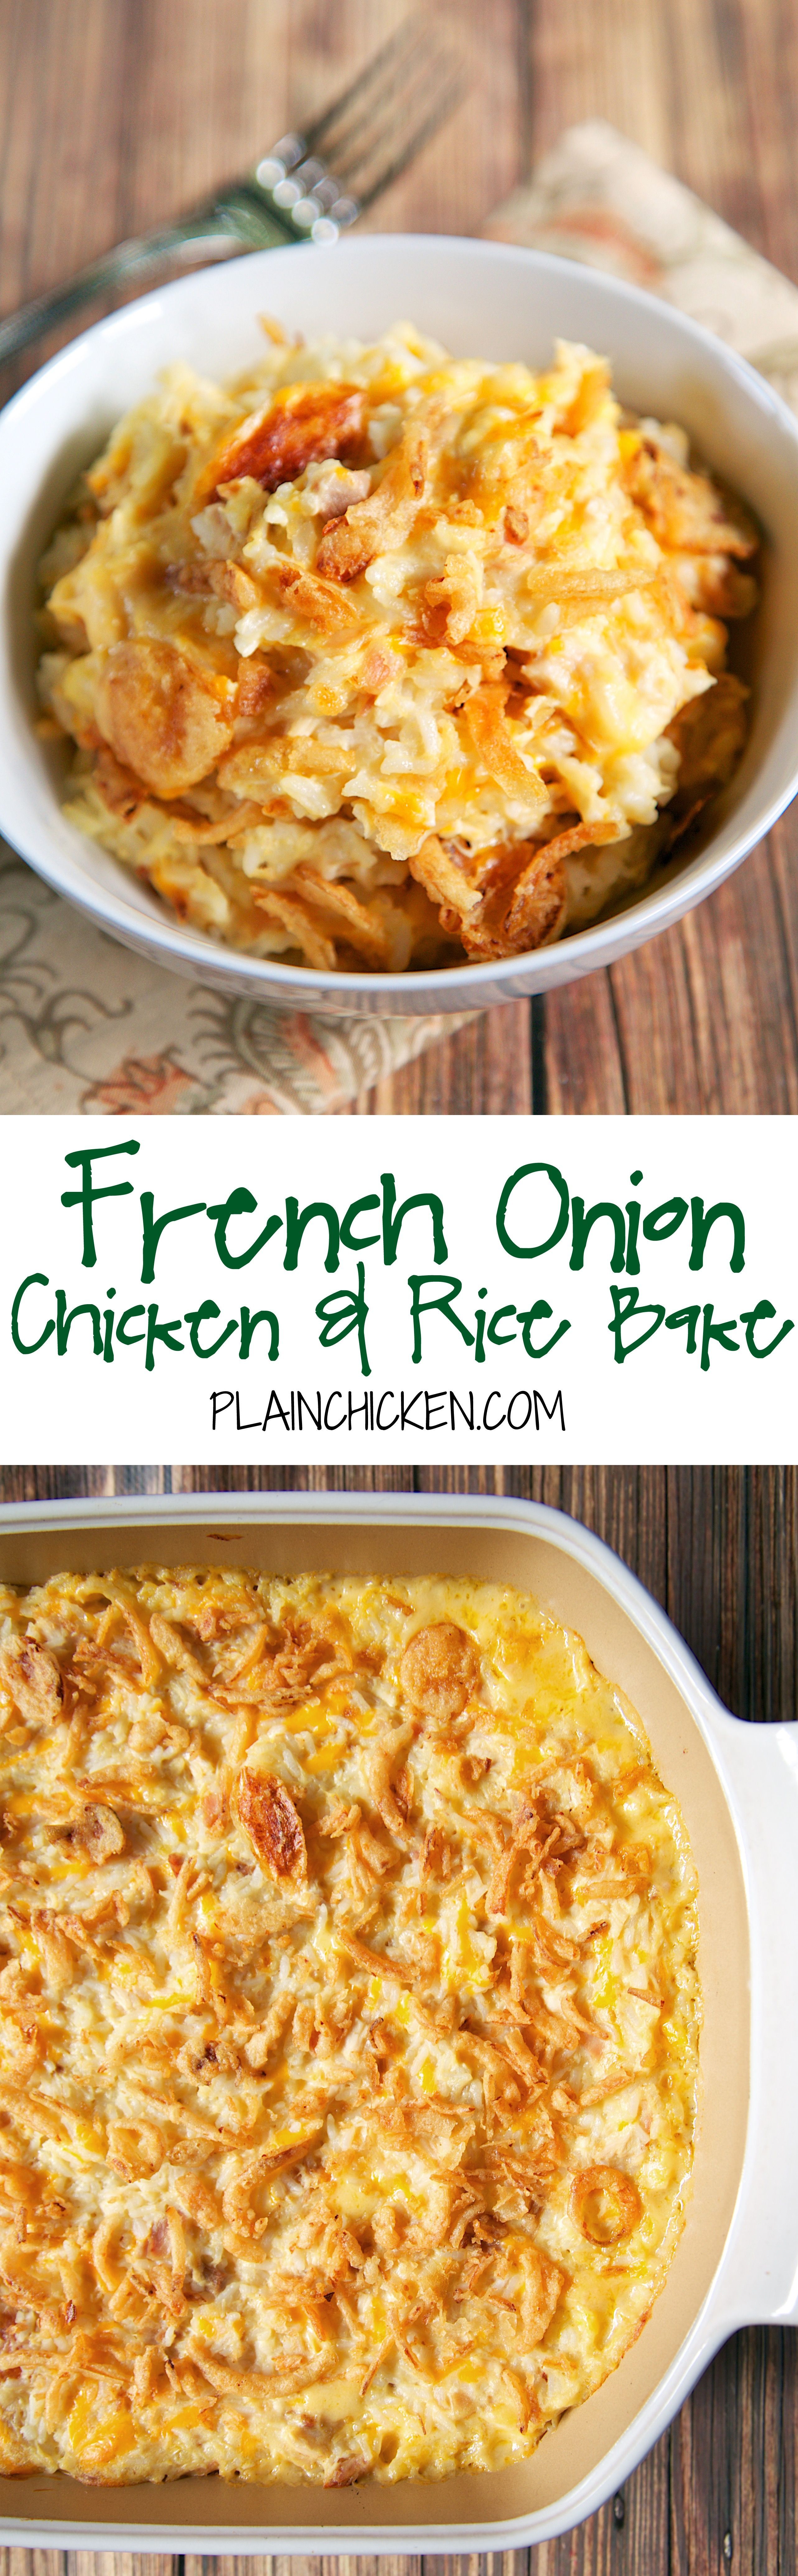 French Onion Chicken and Rice Bake recipe – chicken, french onion dip, cream of chicken soup, cheddar cheese, rice and french